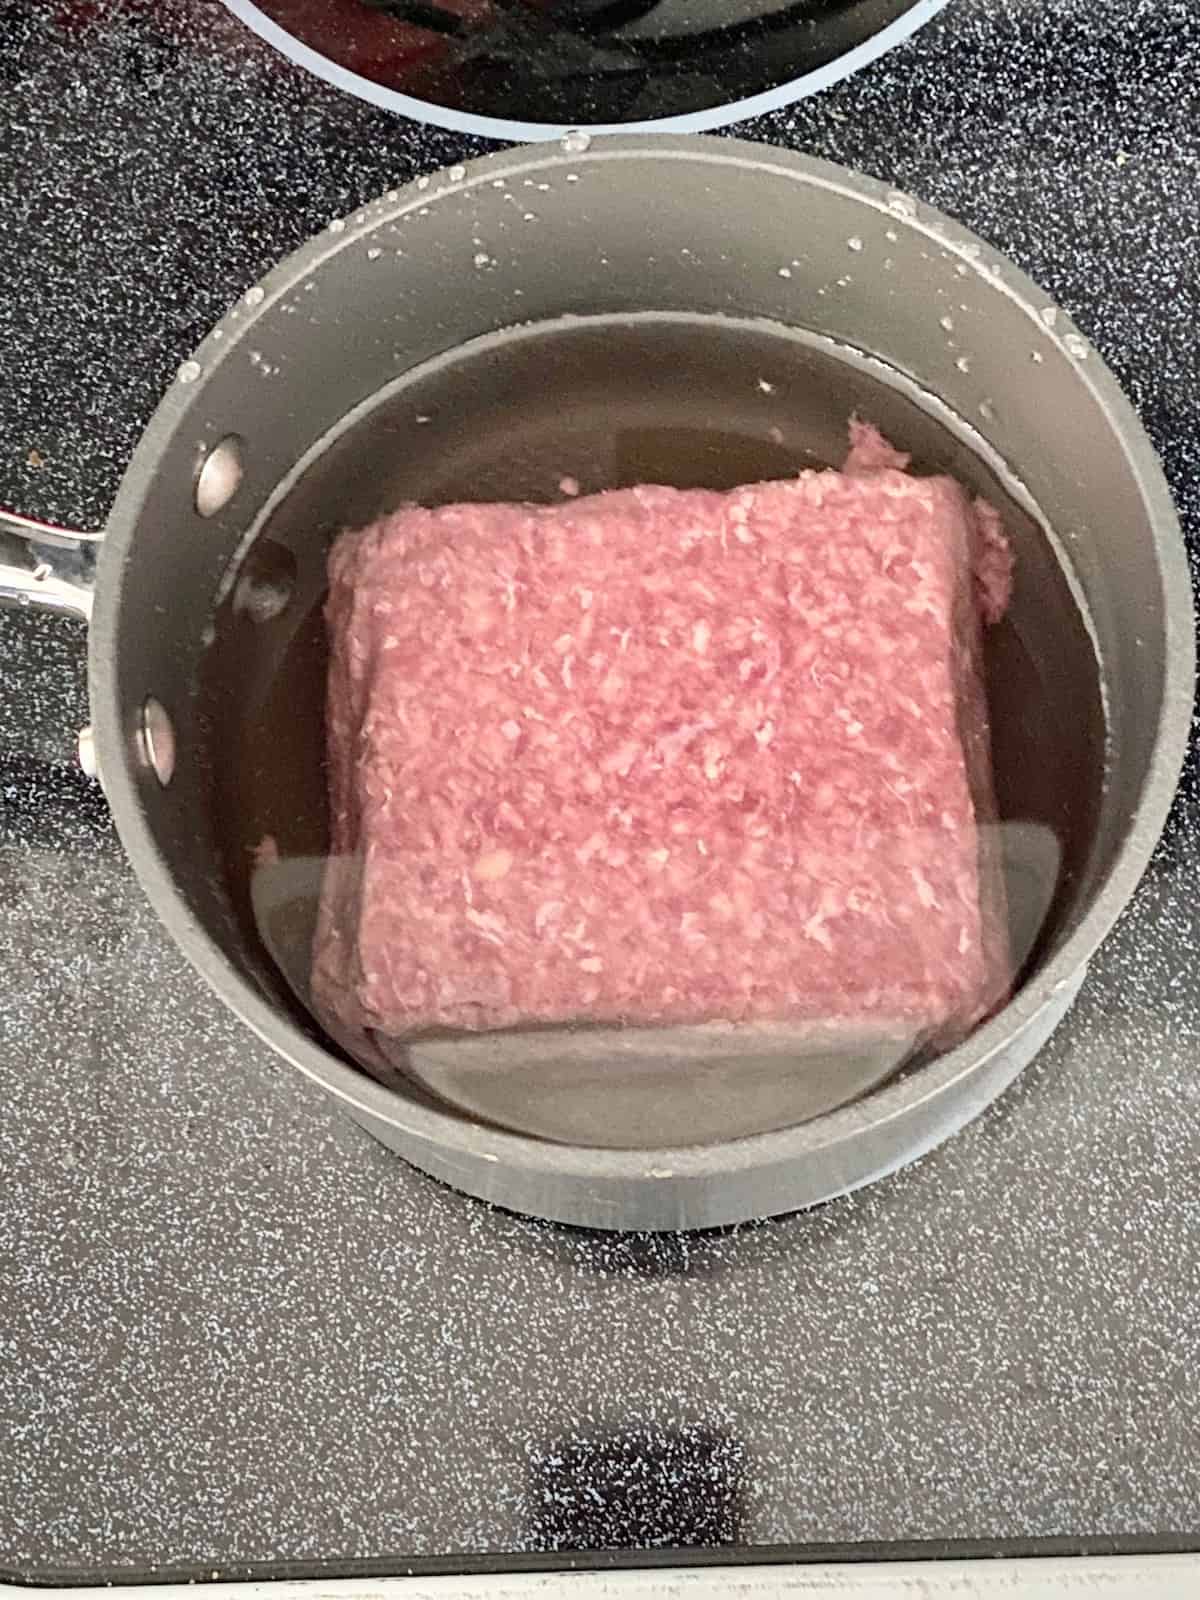 ground beef submerged in water in a pot on the stove